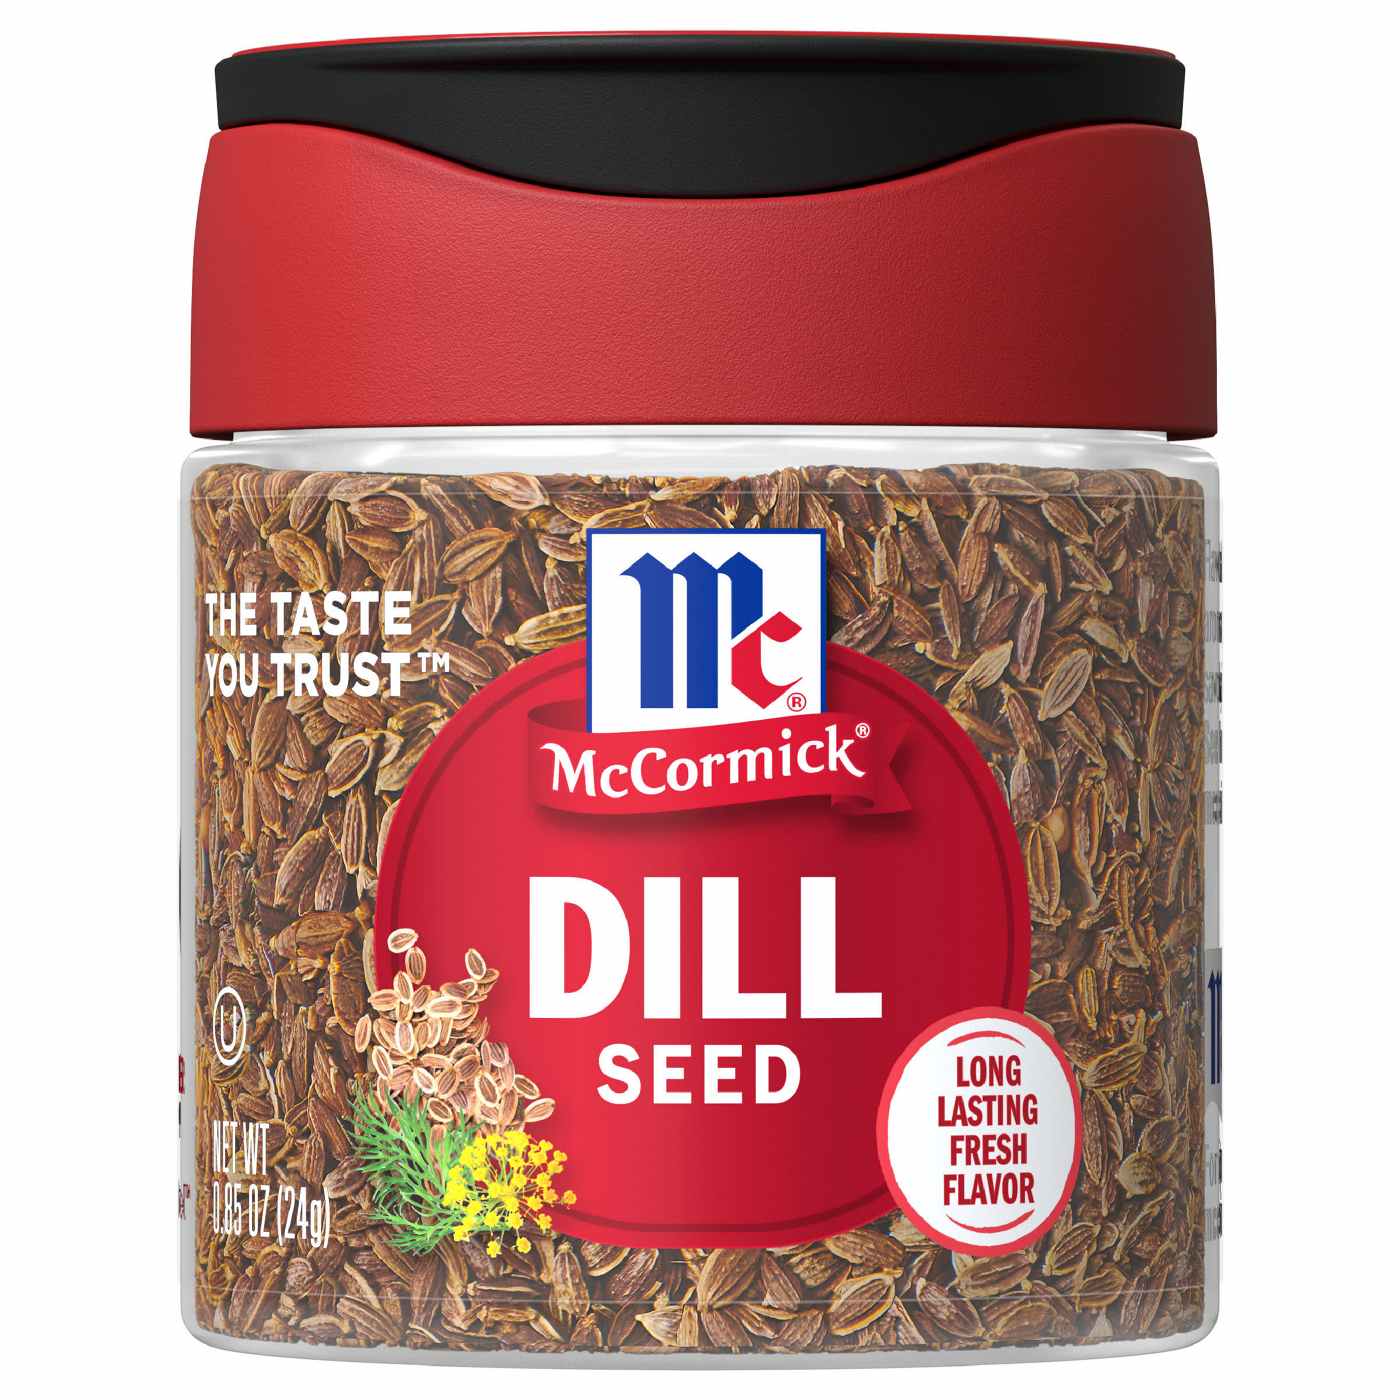 McCormick Dill Seed; image 1 of 8